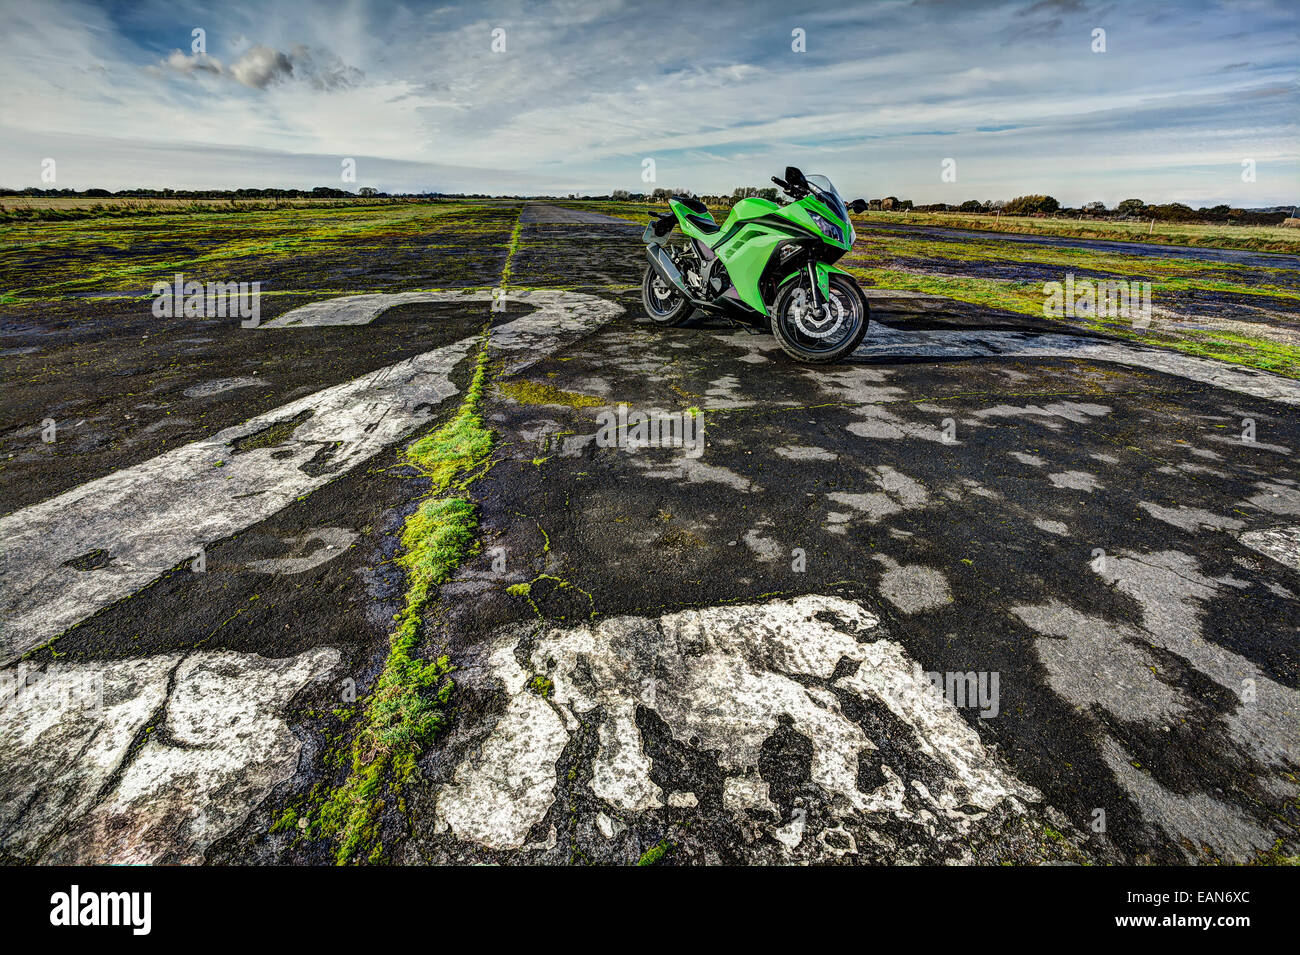 Green sports motorcycle parked on disused airfield runway Stock Photo